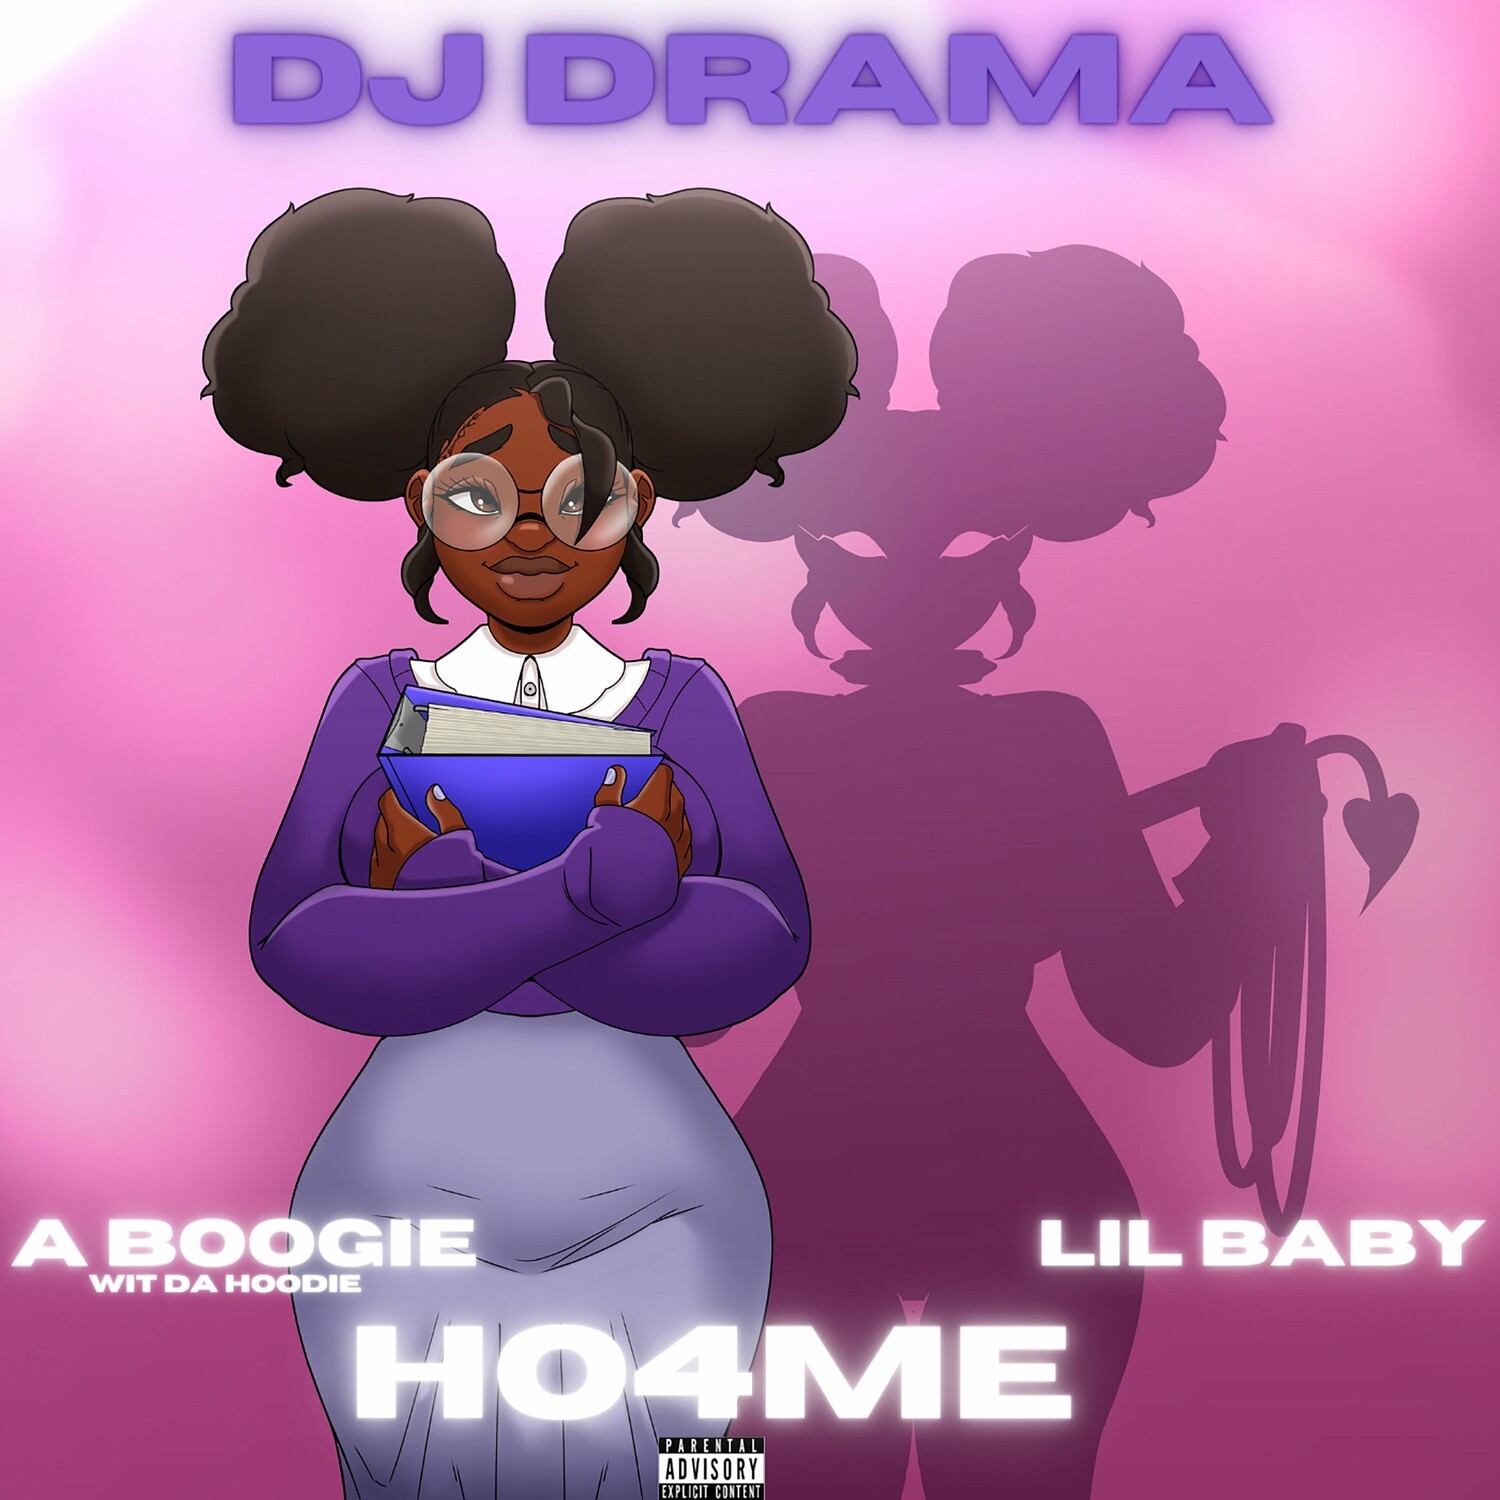 Art for HO4ME (Clean) by DJ Drama & Lil Baby ft A Boogie Wit da Hoodie